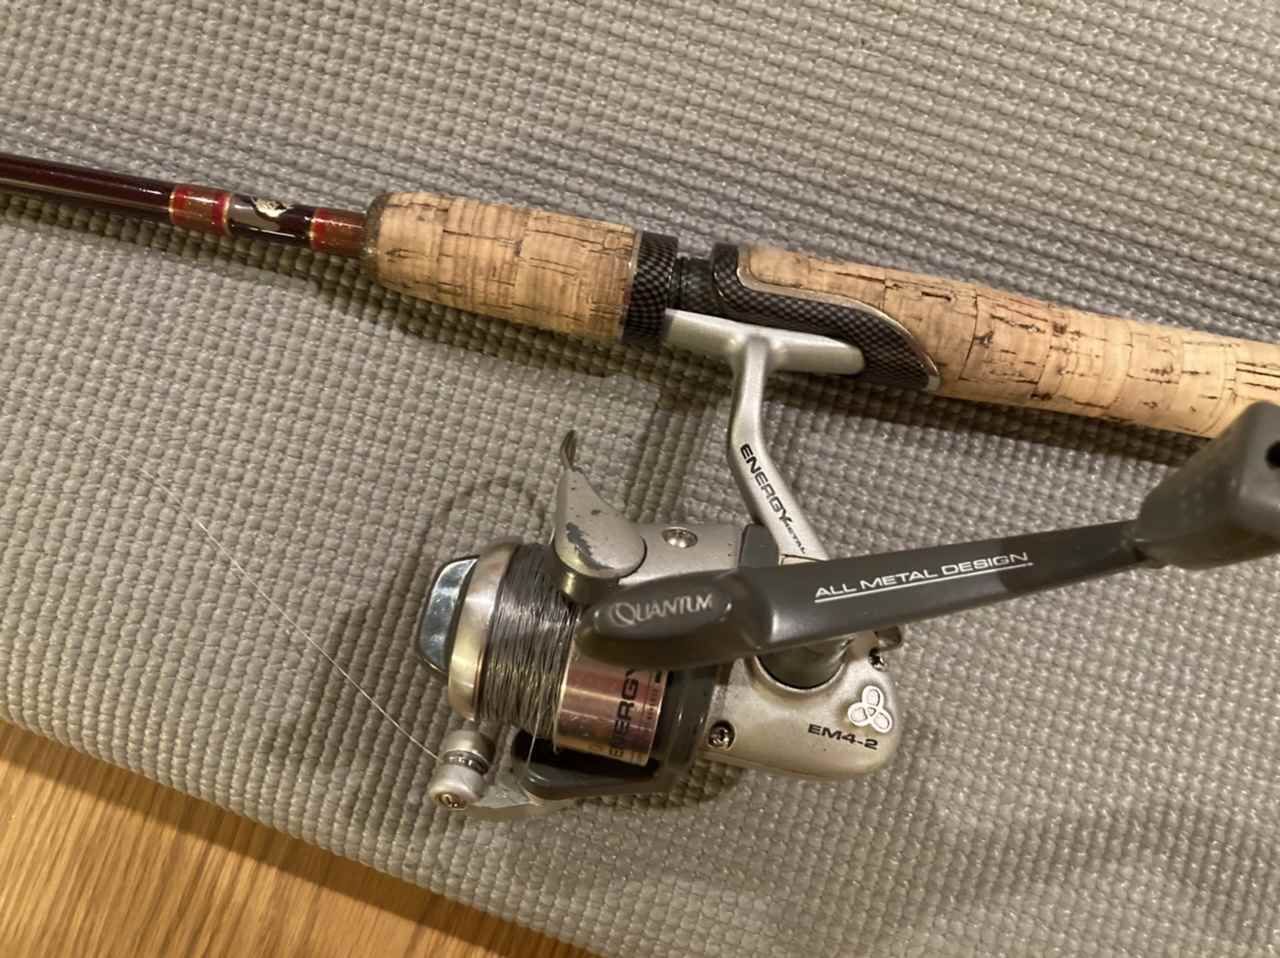 Quantum? - Fishing Rods, Reels, Line, and Knots - Bass Fishing Forums